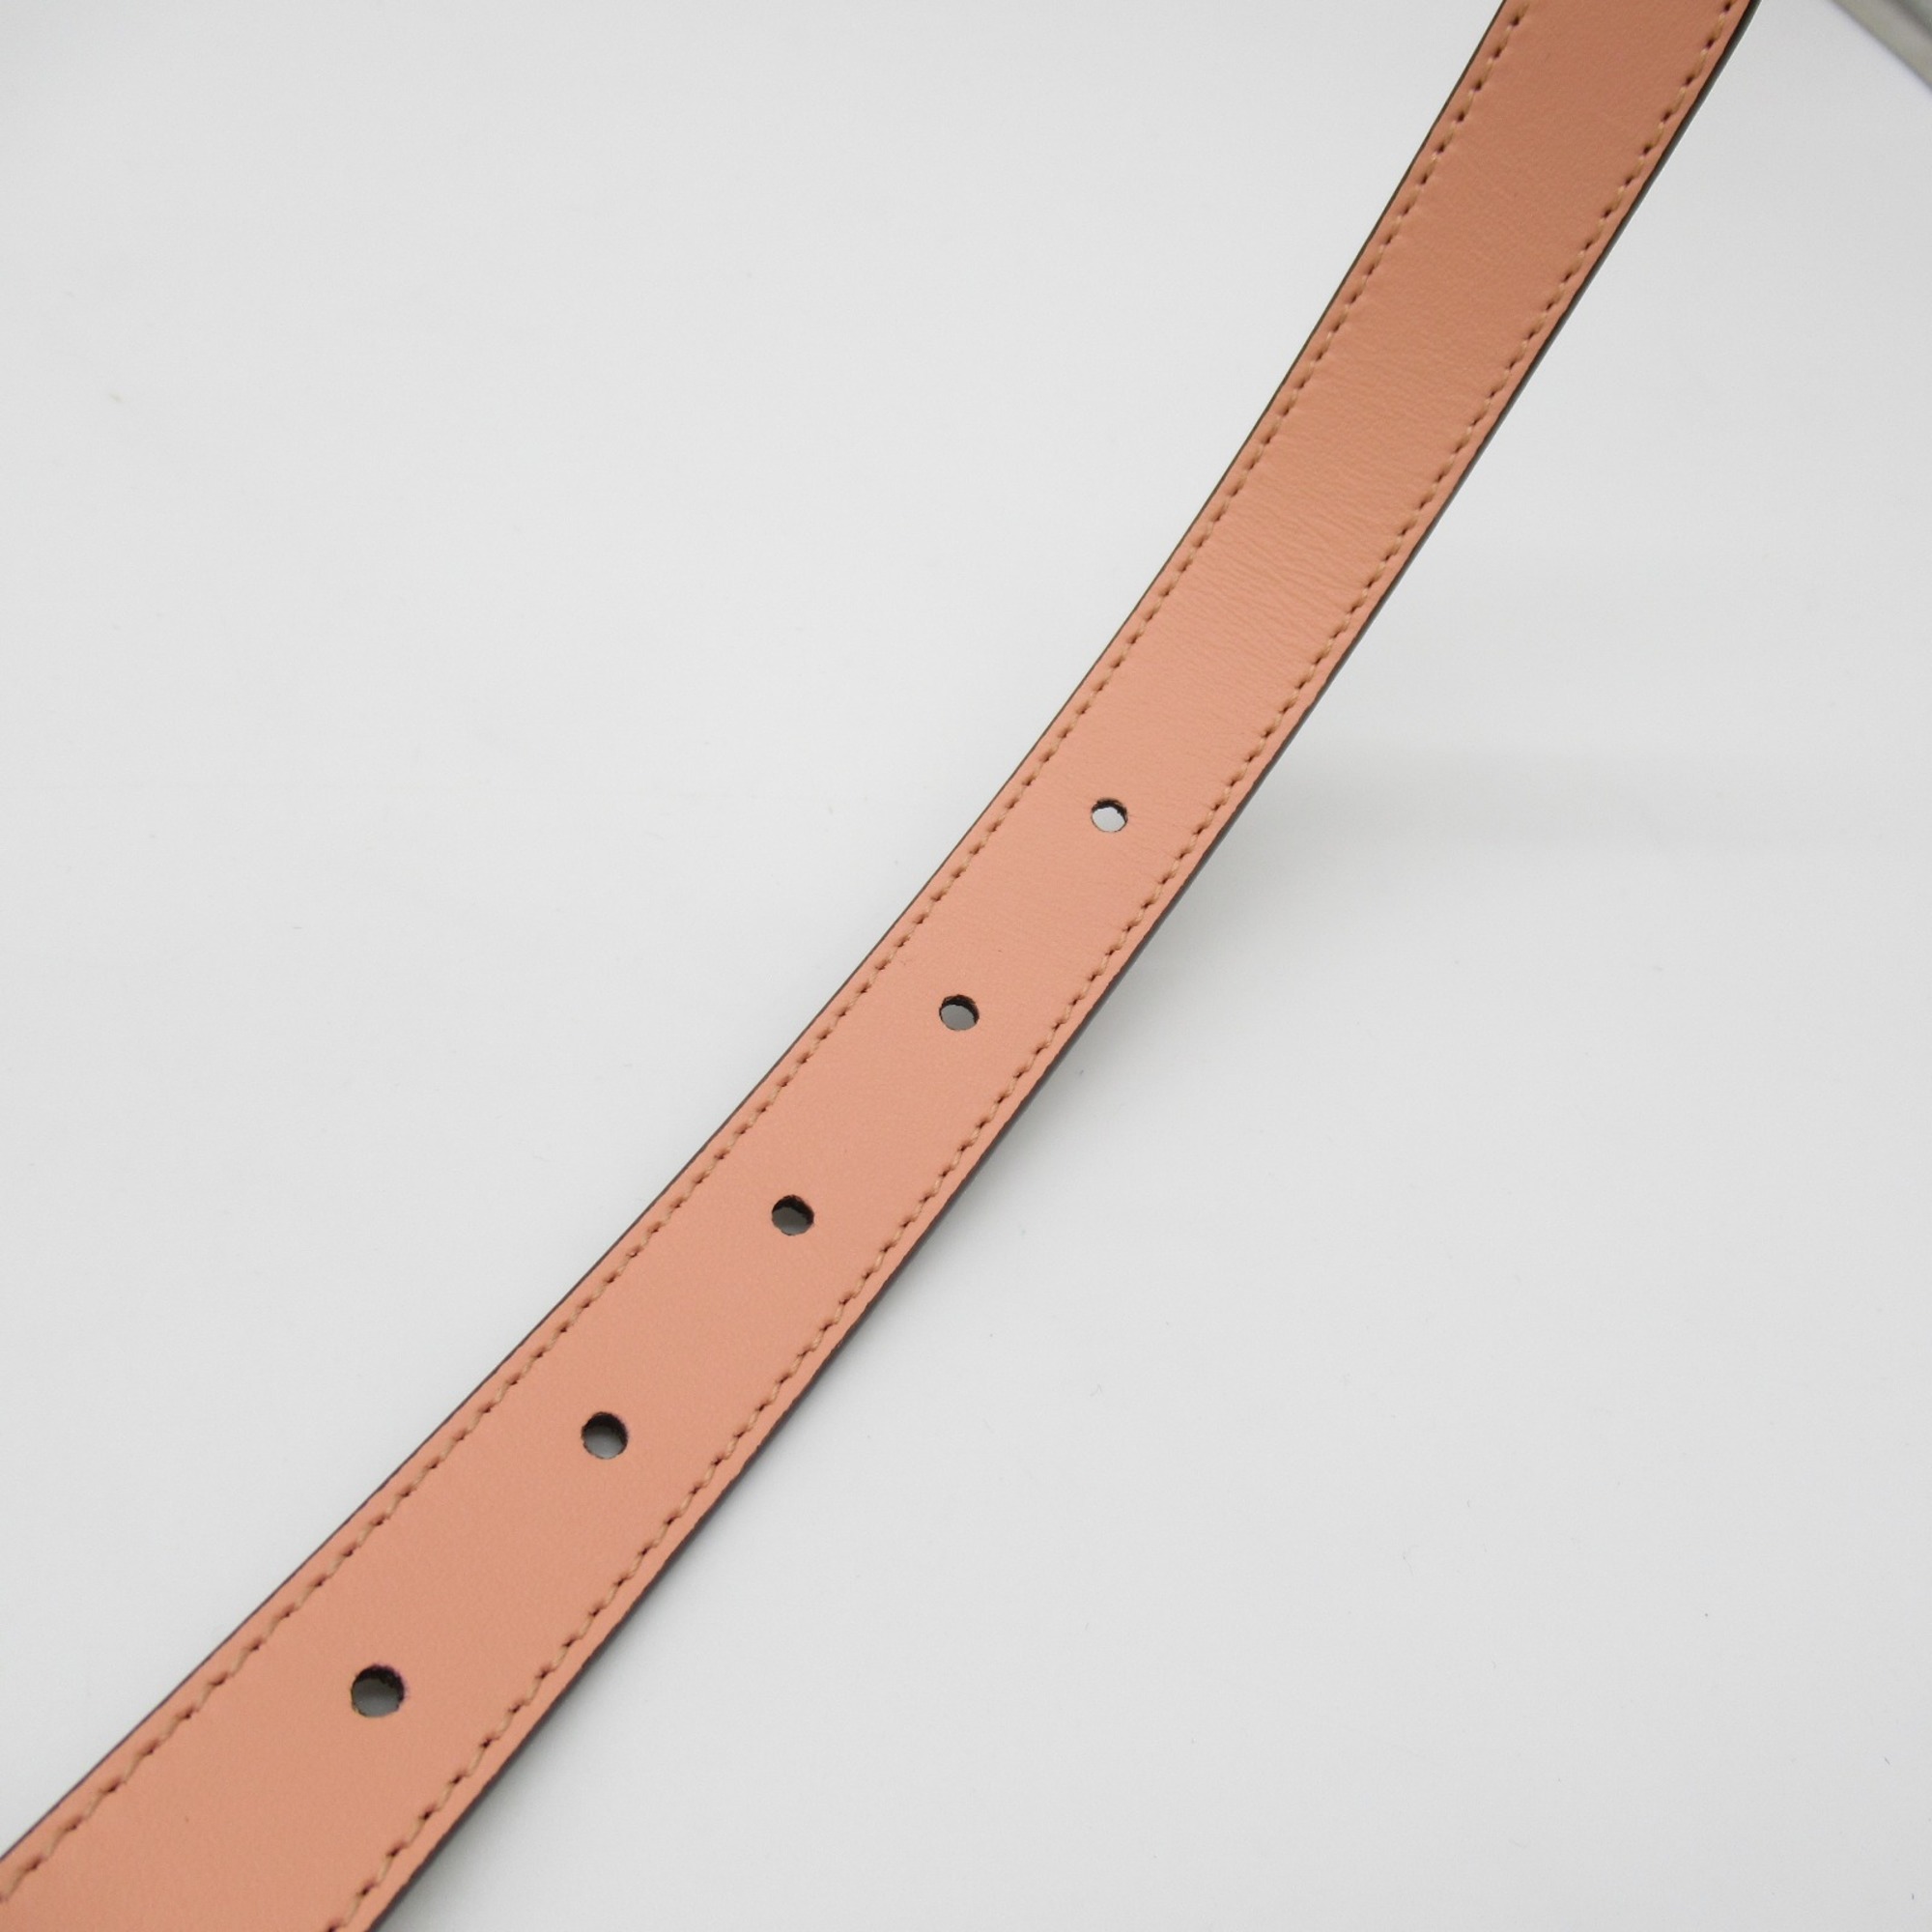 GUCCI GG Marmont reversible belt Beige Pink GG Supreme Canvas 65941892TIC995285